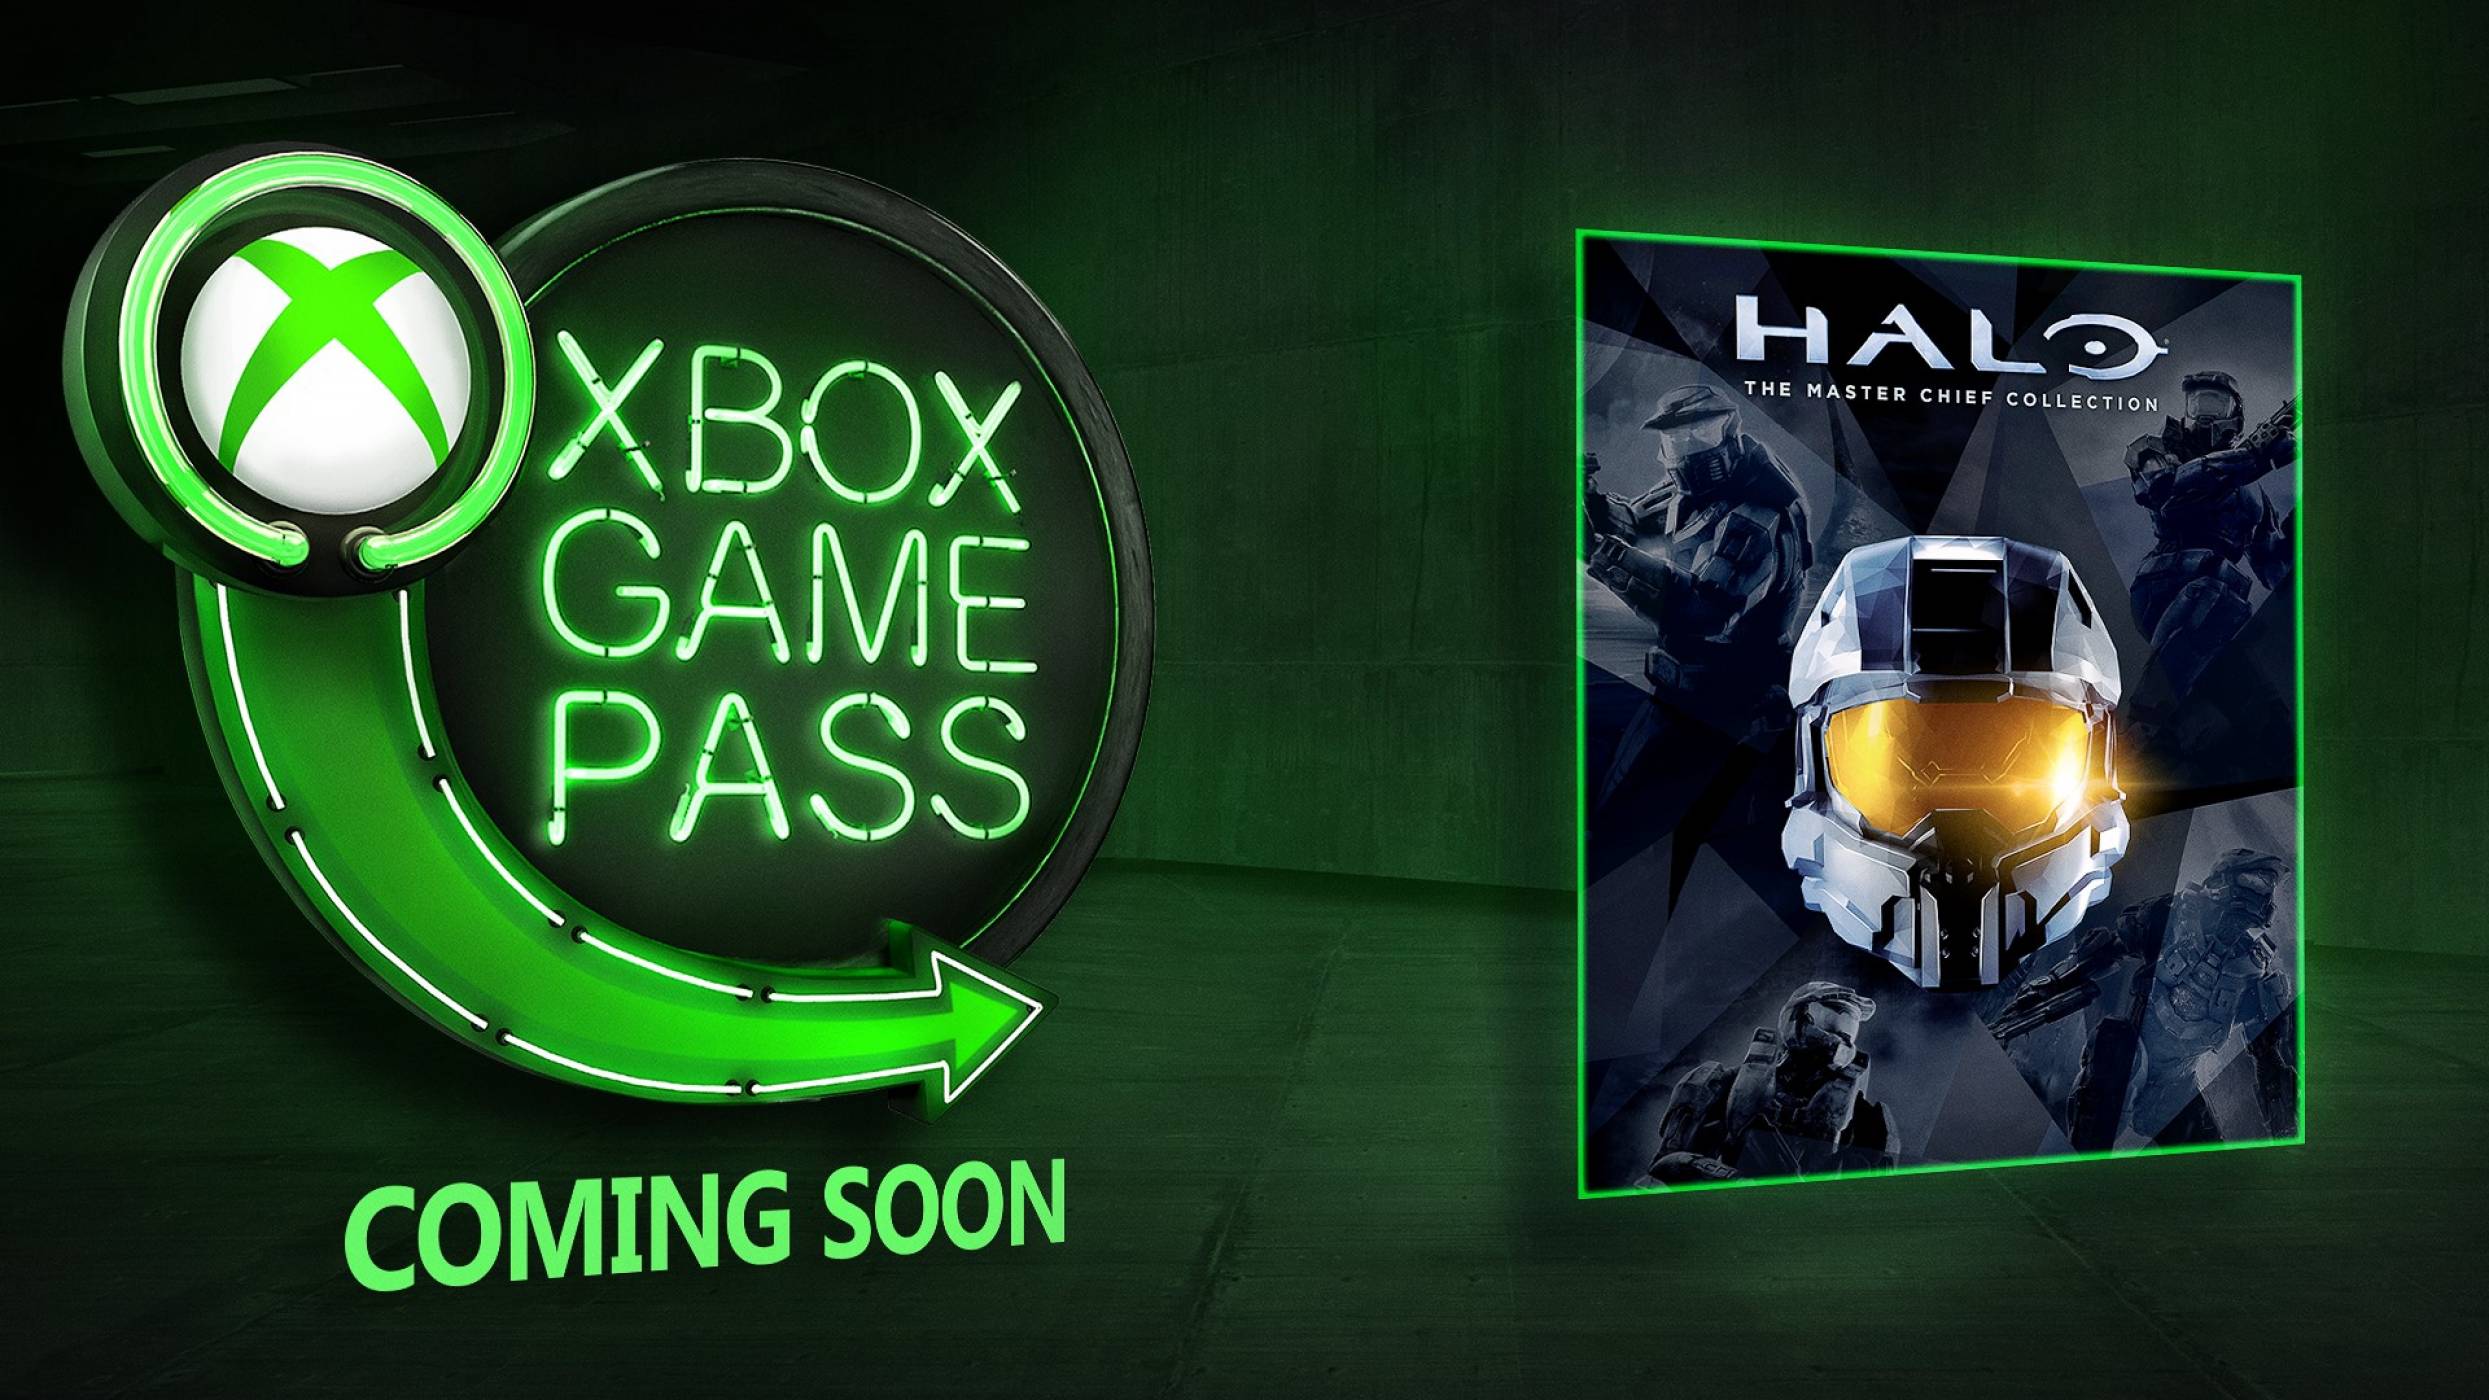 Games is soon. Halo game Pass. Xbox game Pass. Хейл игра. Coming soon игра.